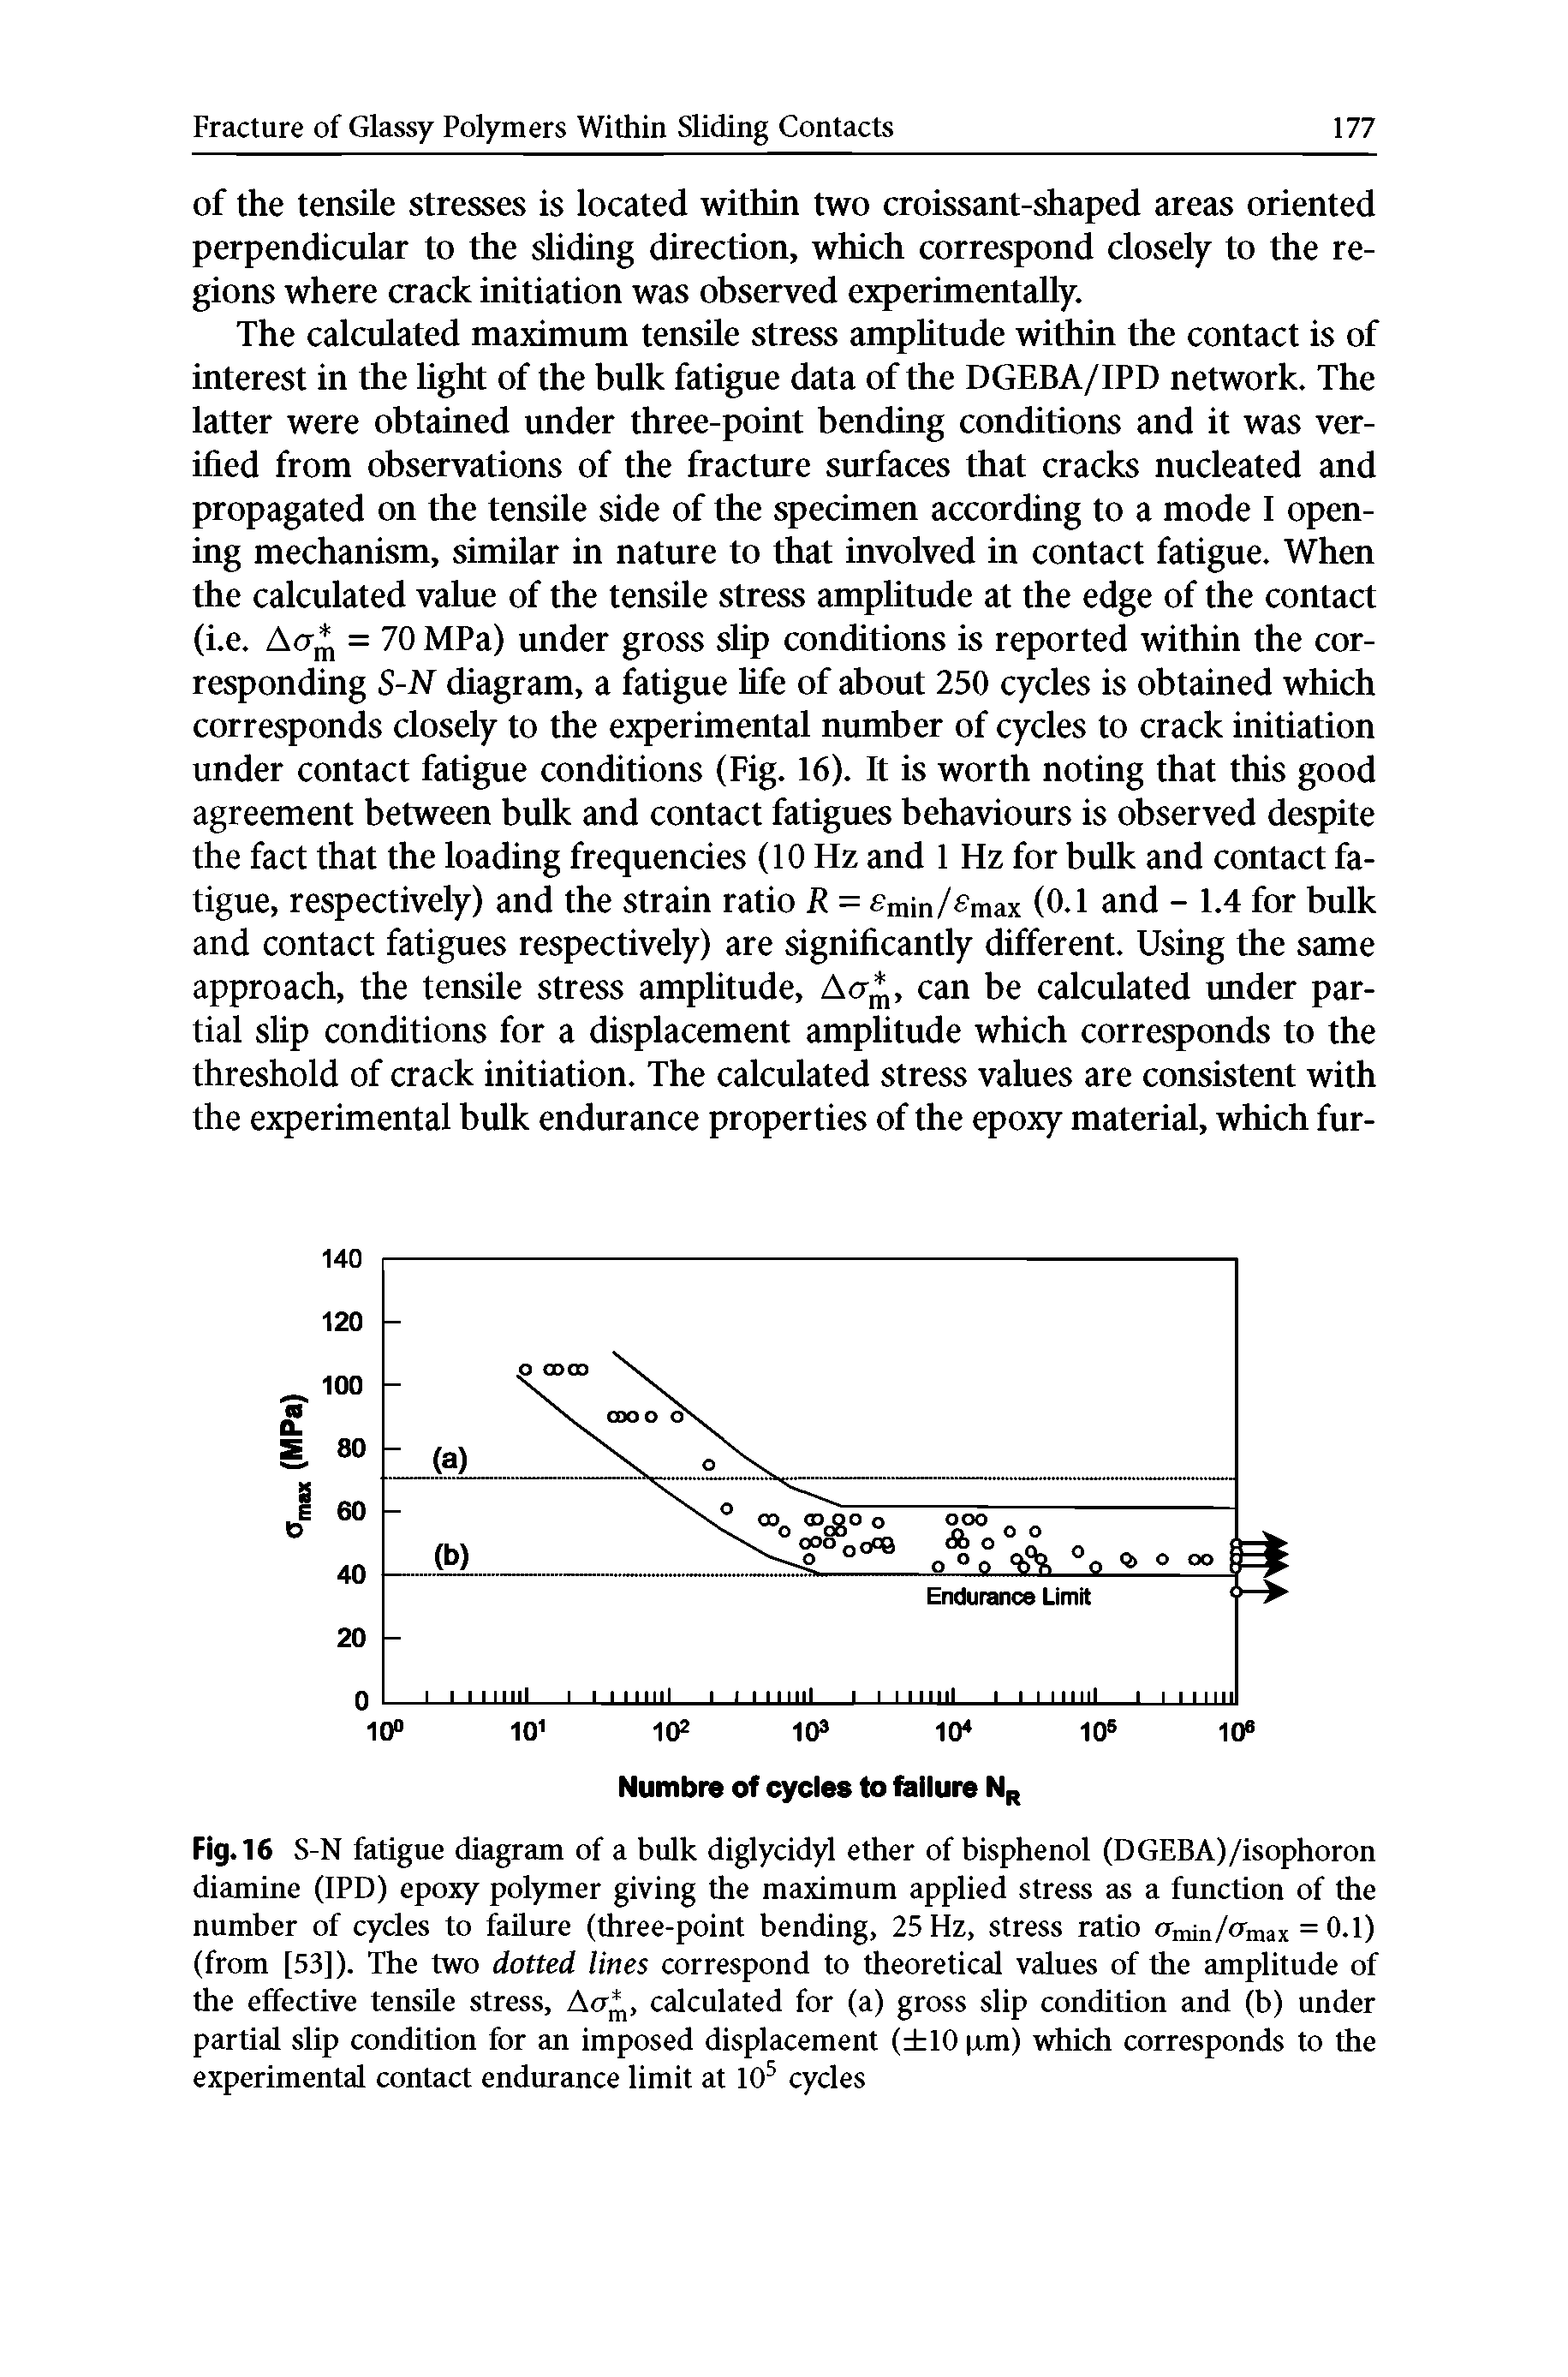 Fig.16 S-N fatigue diagram of a bulk diglycidyl ether of bisphenol (DGEBA)/isophoron diamine (IPD) epoxy polymer giving the maximum applied stress as a function of the number of cycles to failure (three-point bending, 25 Hz, stress ratio OminMnax = 0.1) (from [53]). The two dotted lines correspond to theoretical values of the amplitude of the effective tensile stress, Acr, calculated for (a) gross slip condition and (b) under partial slip condition for an imposed displacement ( 10 xm) which corresponds to the experimental contact endurance limit at 105 cycles...